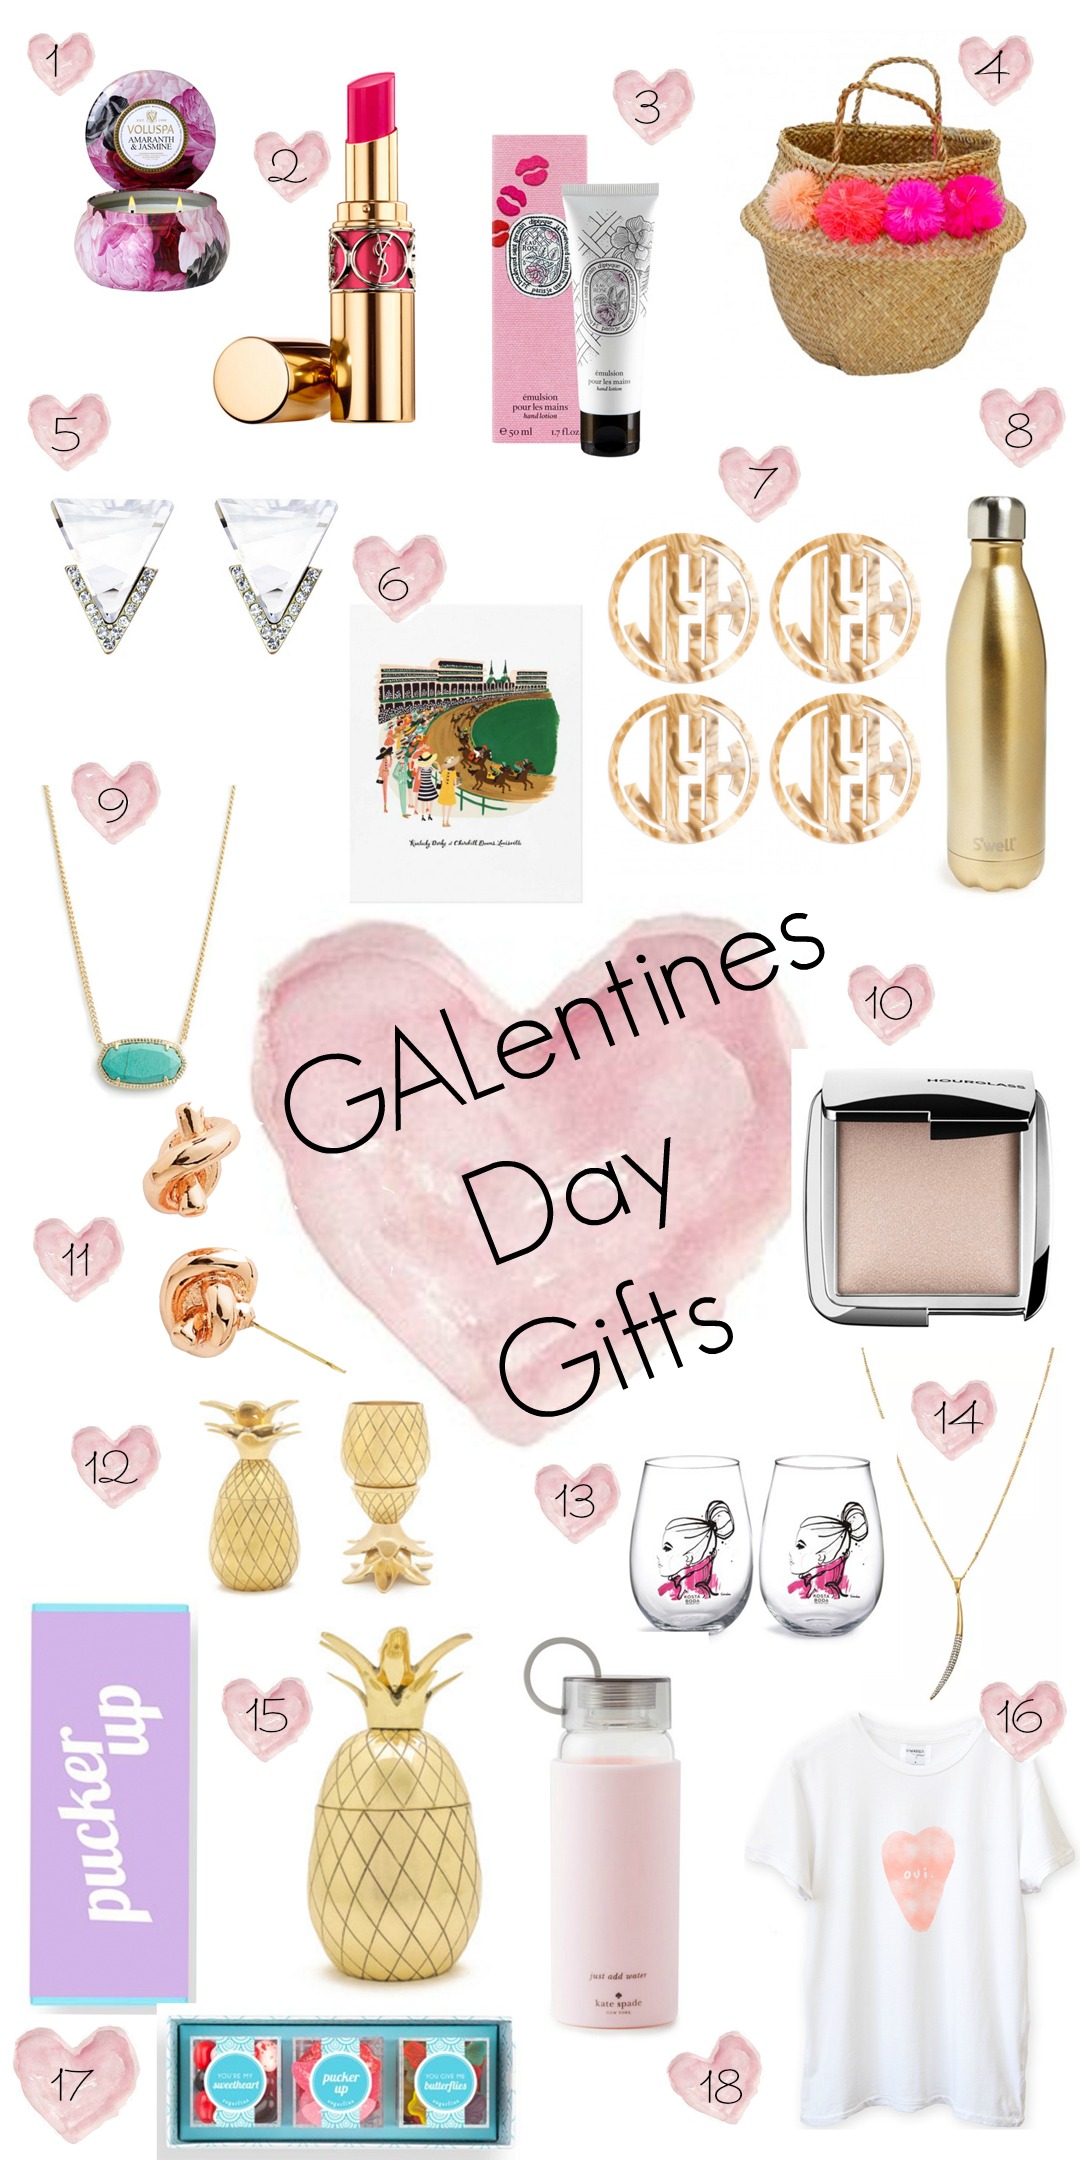 What to get your girlfriend for Valentine's Day? - SnapBlooms Blogs